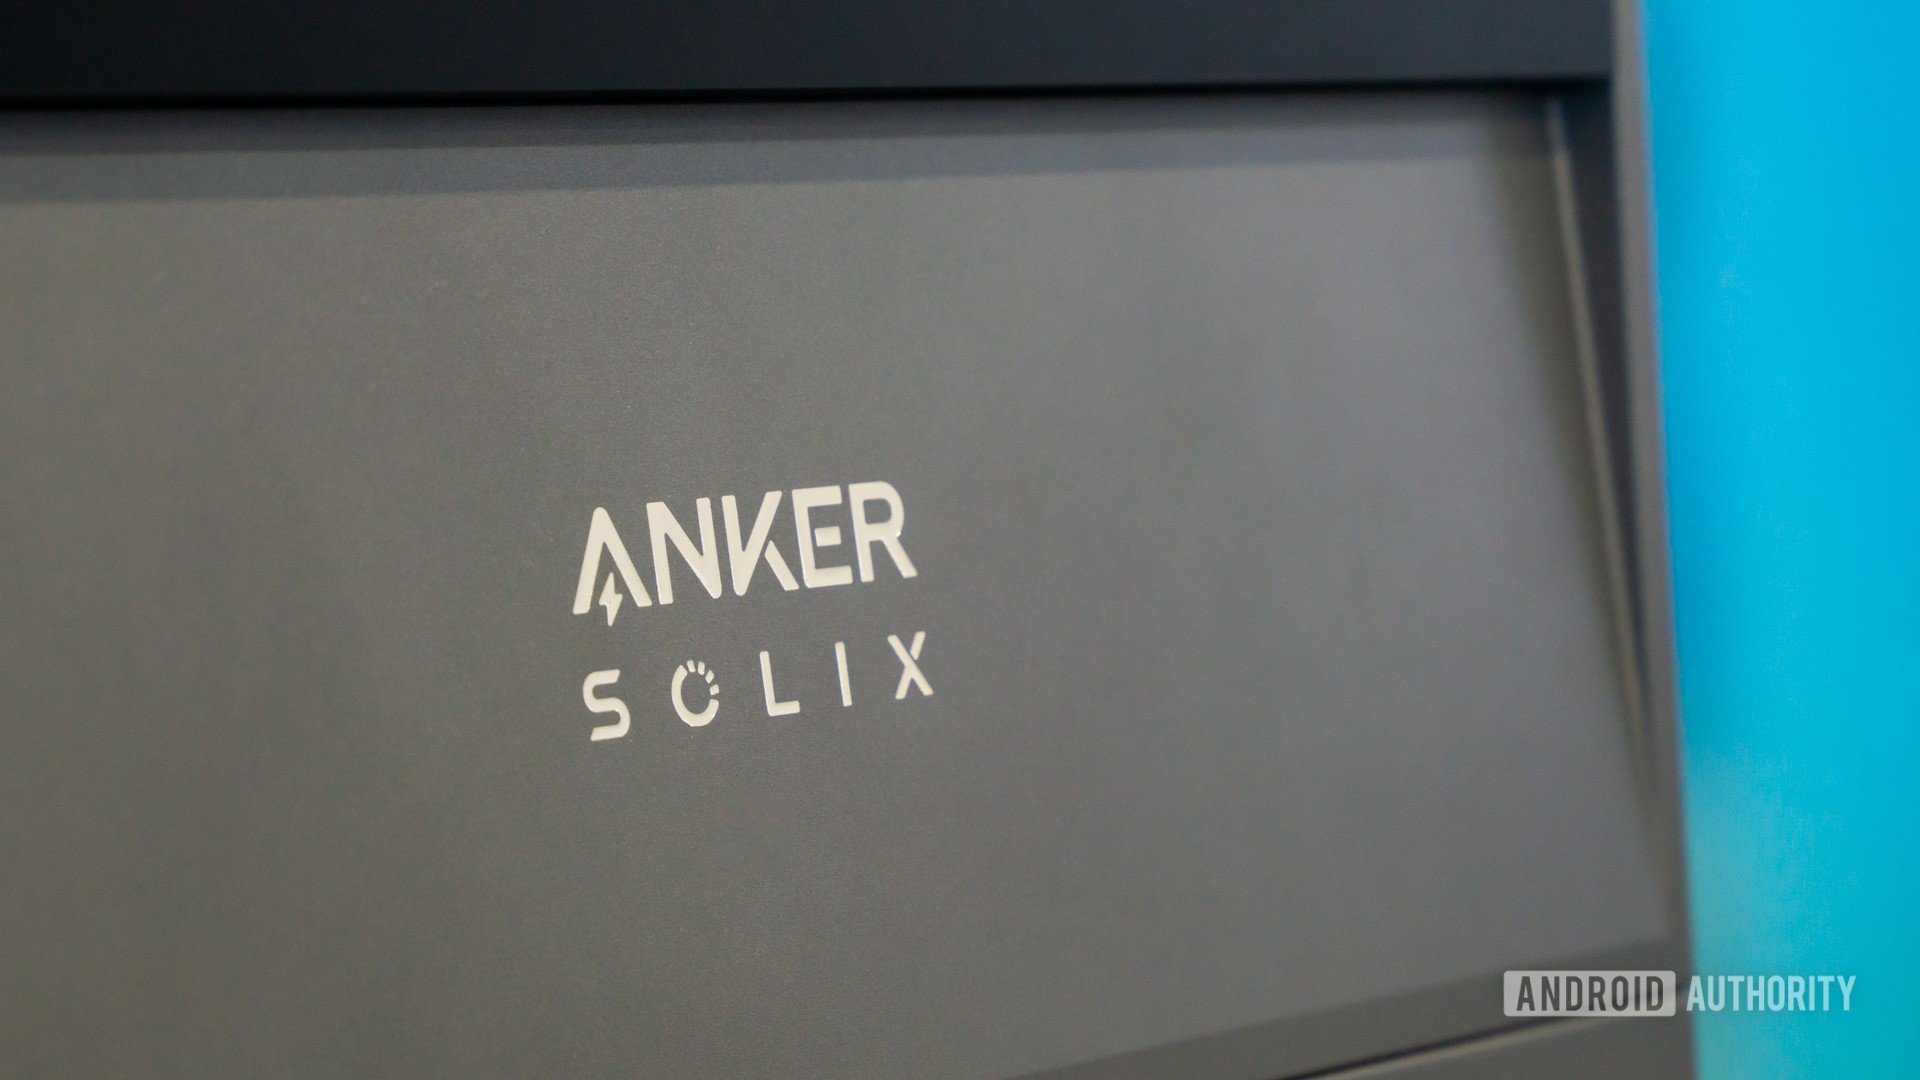 Massive Anker SOLIX battery deals: Get them while they last!